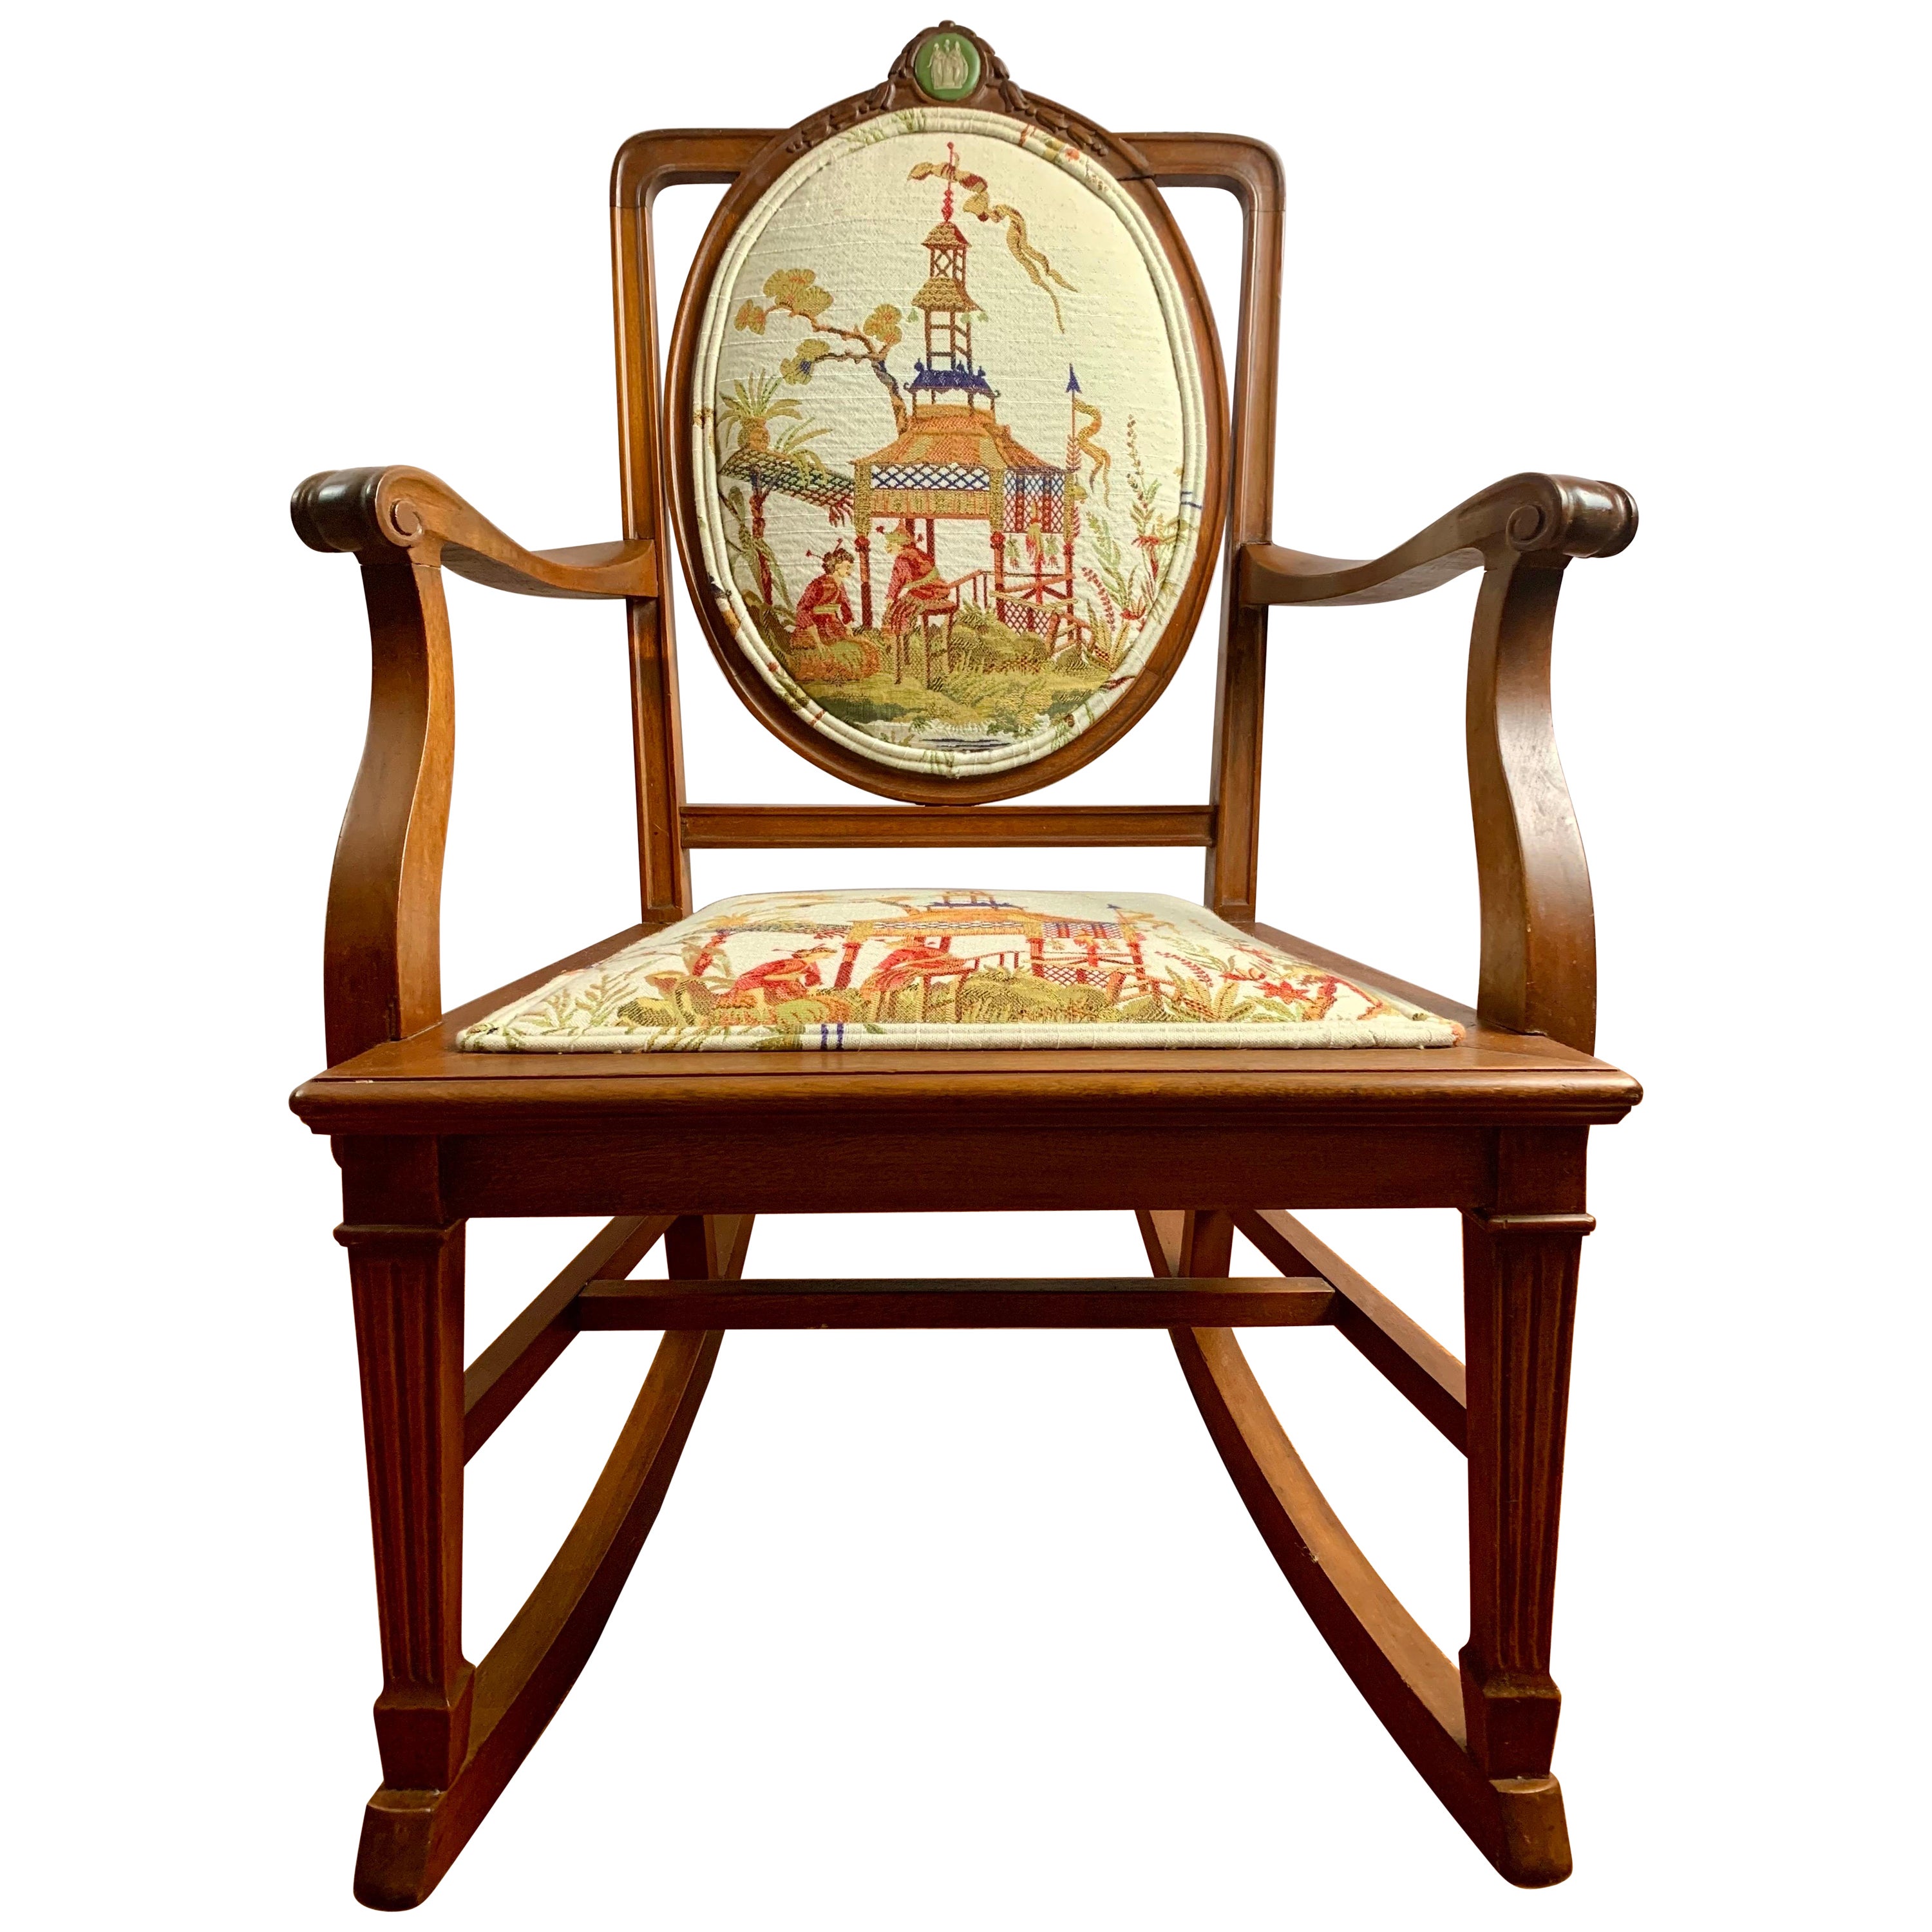 Antique English Chinoiserie Upholstered Rocking Chair w/ Wedgwood Medallion For Sale